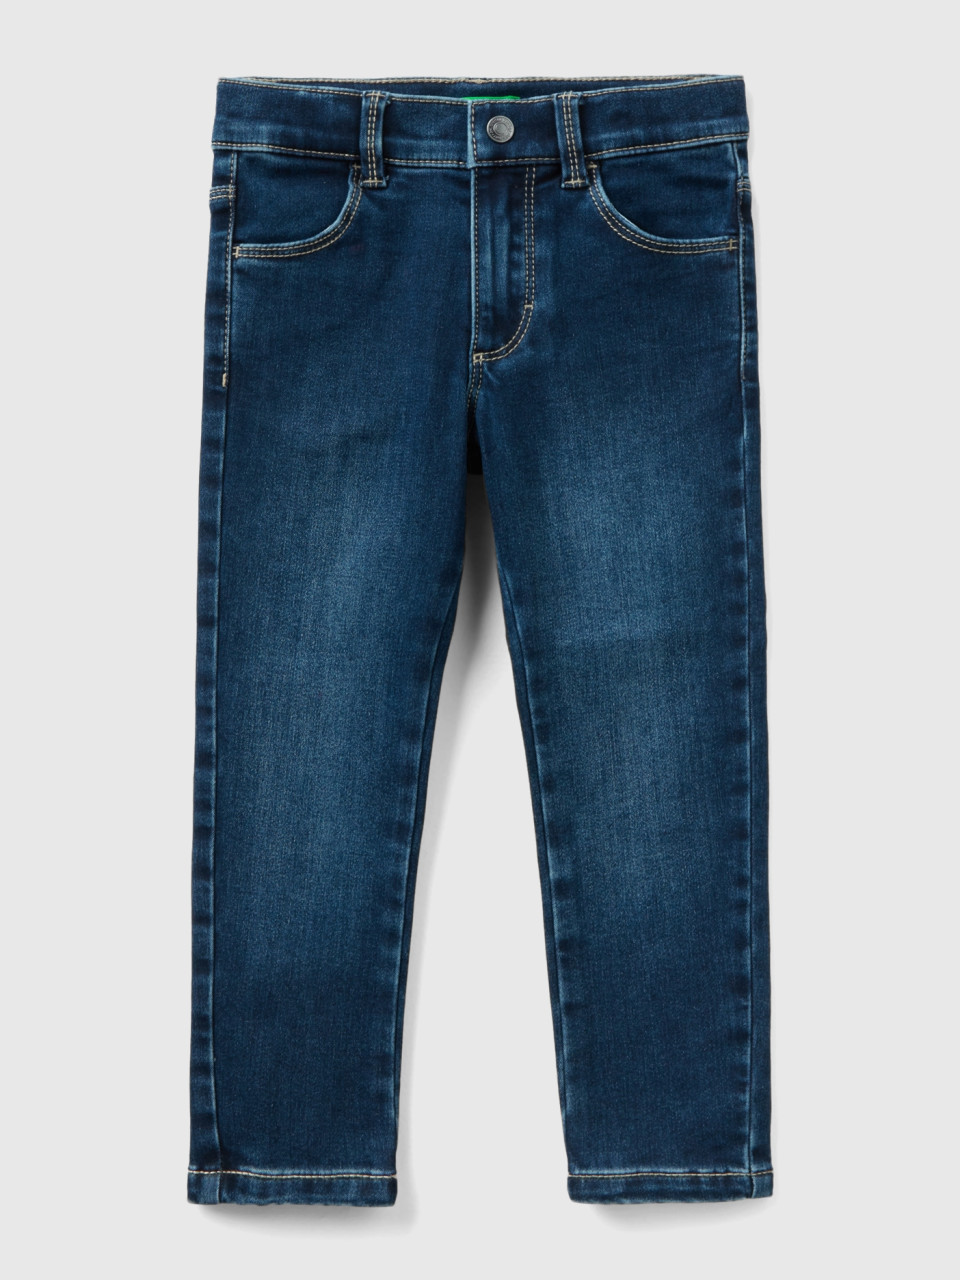 Benetton, Thermal Skinny Fit Jeans, Blue, Kids